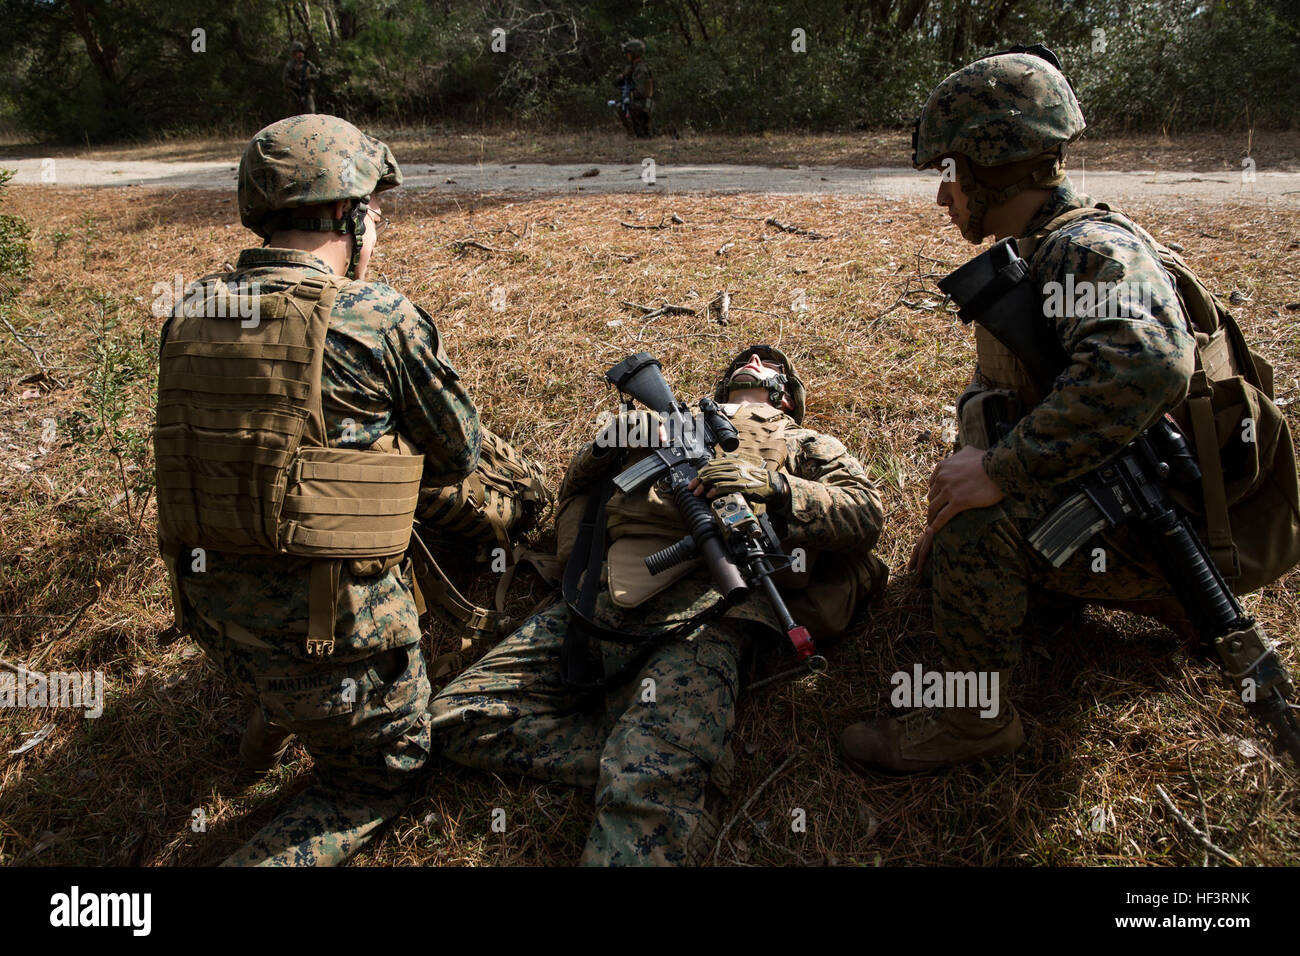 U.S. Marines assigned to 2d Low Altitude Air Defense Battalion (2D LAAD), Marine Medium Tiltrotor Squadron 264 (reinforced), conduct improvised explosive device training on Marine Corps Outlying Field Atlantic, N.C., Feb. 15, 2016. 2D LAAD conducted the training in preparation for deployment with the 22nd Marine Expeditionary Unit. (U.S. Marine Corps photo by Cpl. Jodson B. Graves/Released) 2D LAAD Pre-Deployment Training 160217-M-SW506-184 Stock Photo